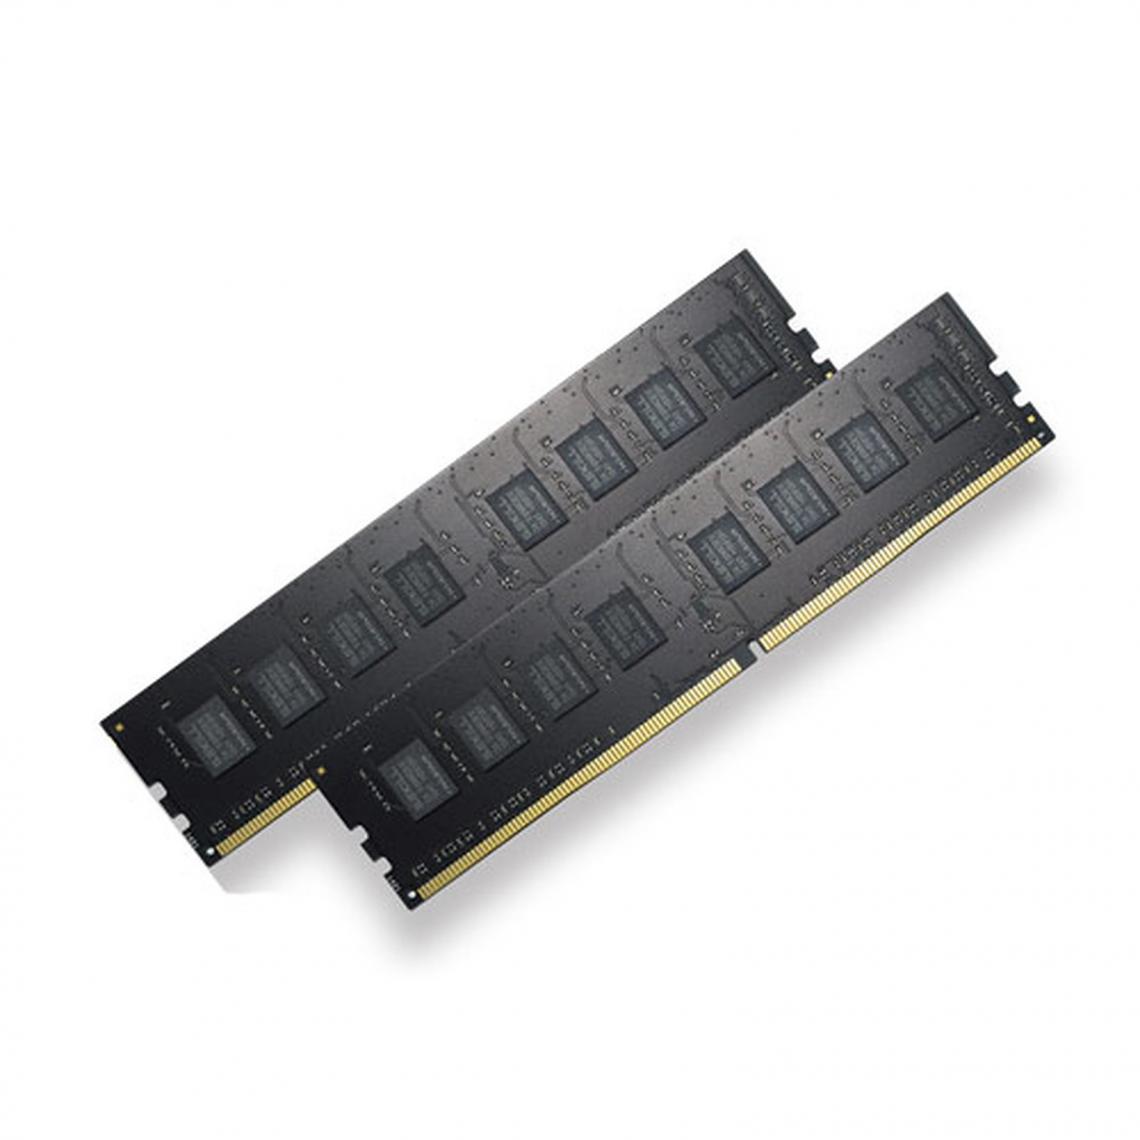 Gskill - Value 64 Go (2x 32 Go) DDR4 2666 MHz CL19 - RAM PC Fixe